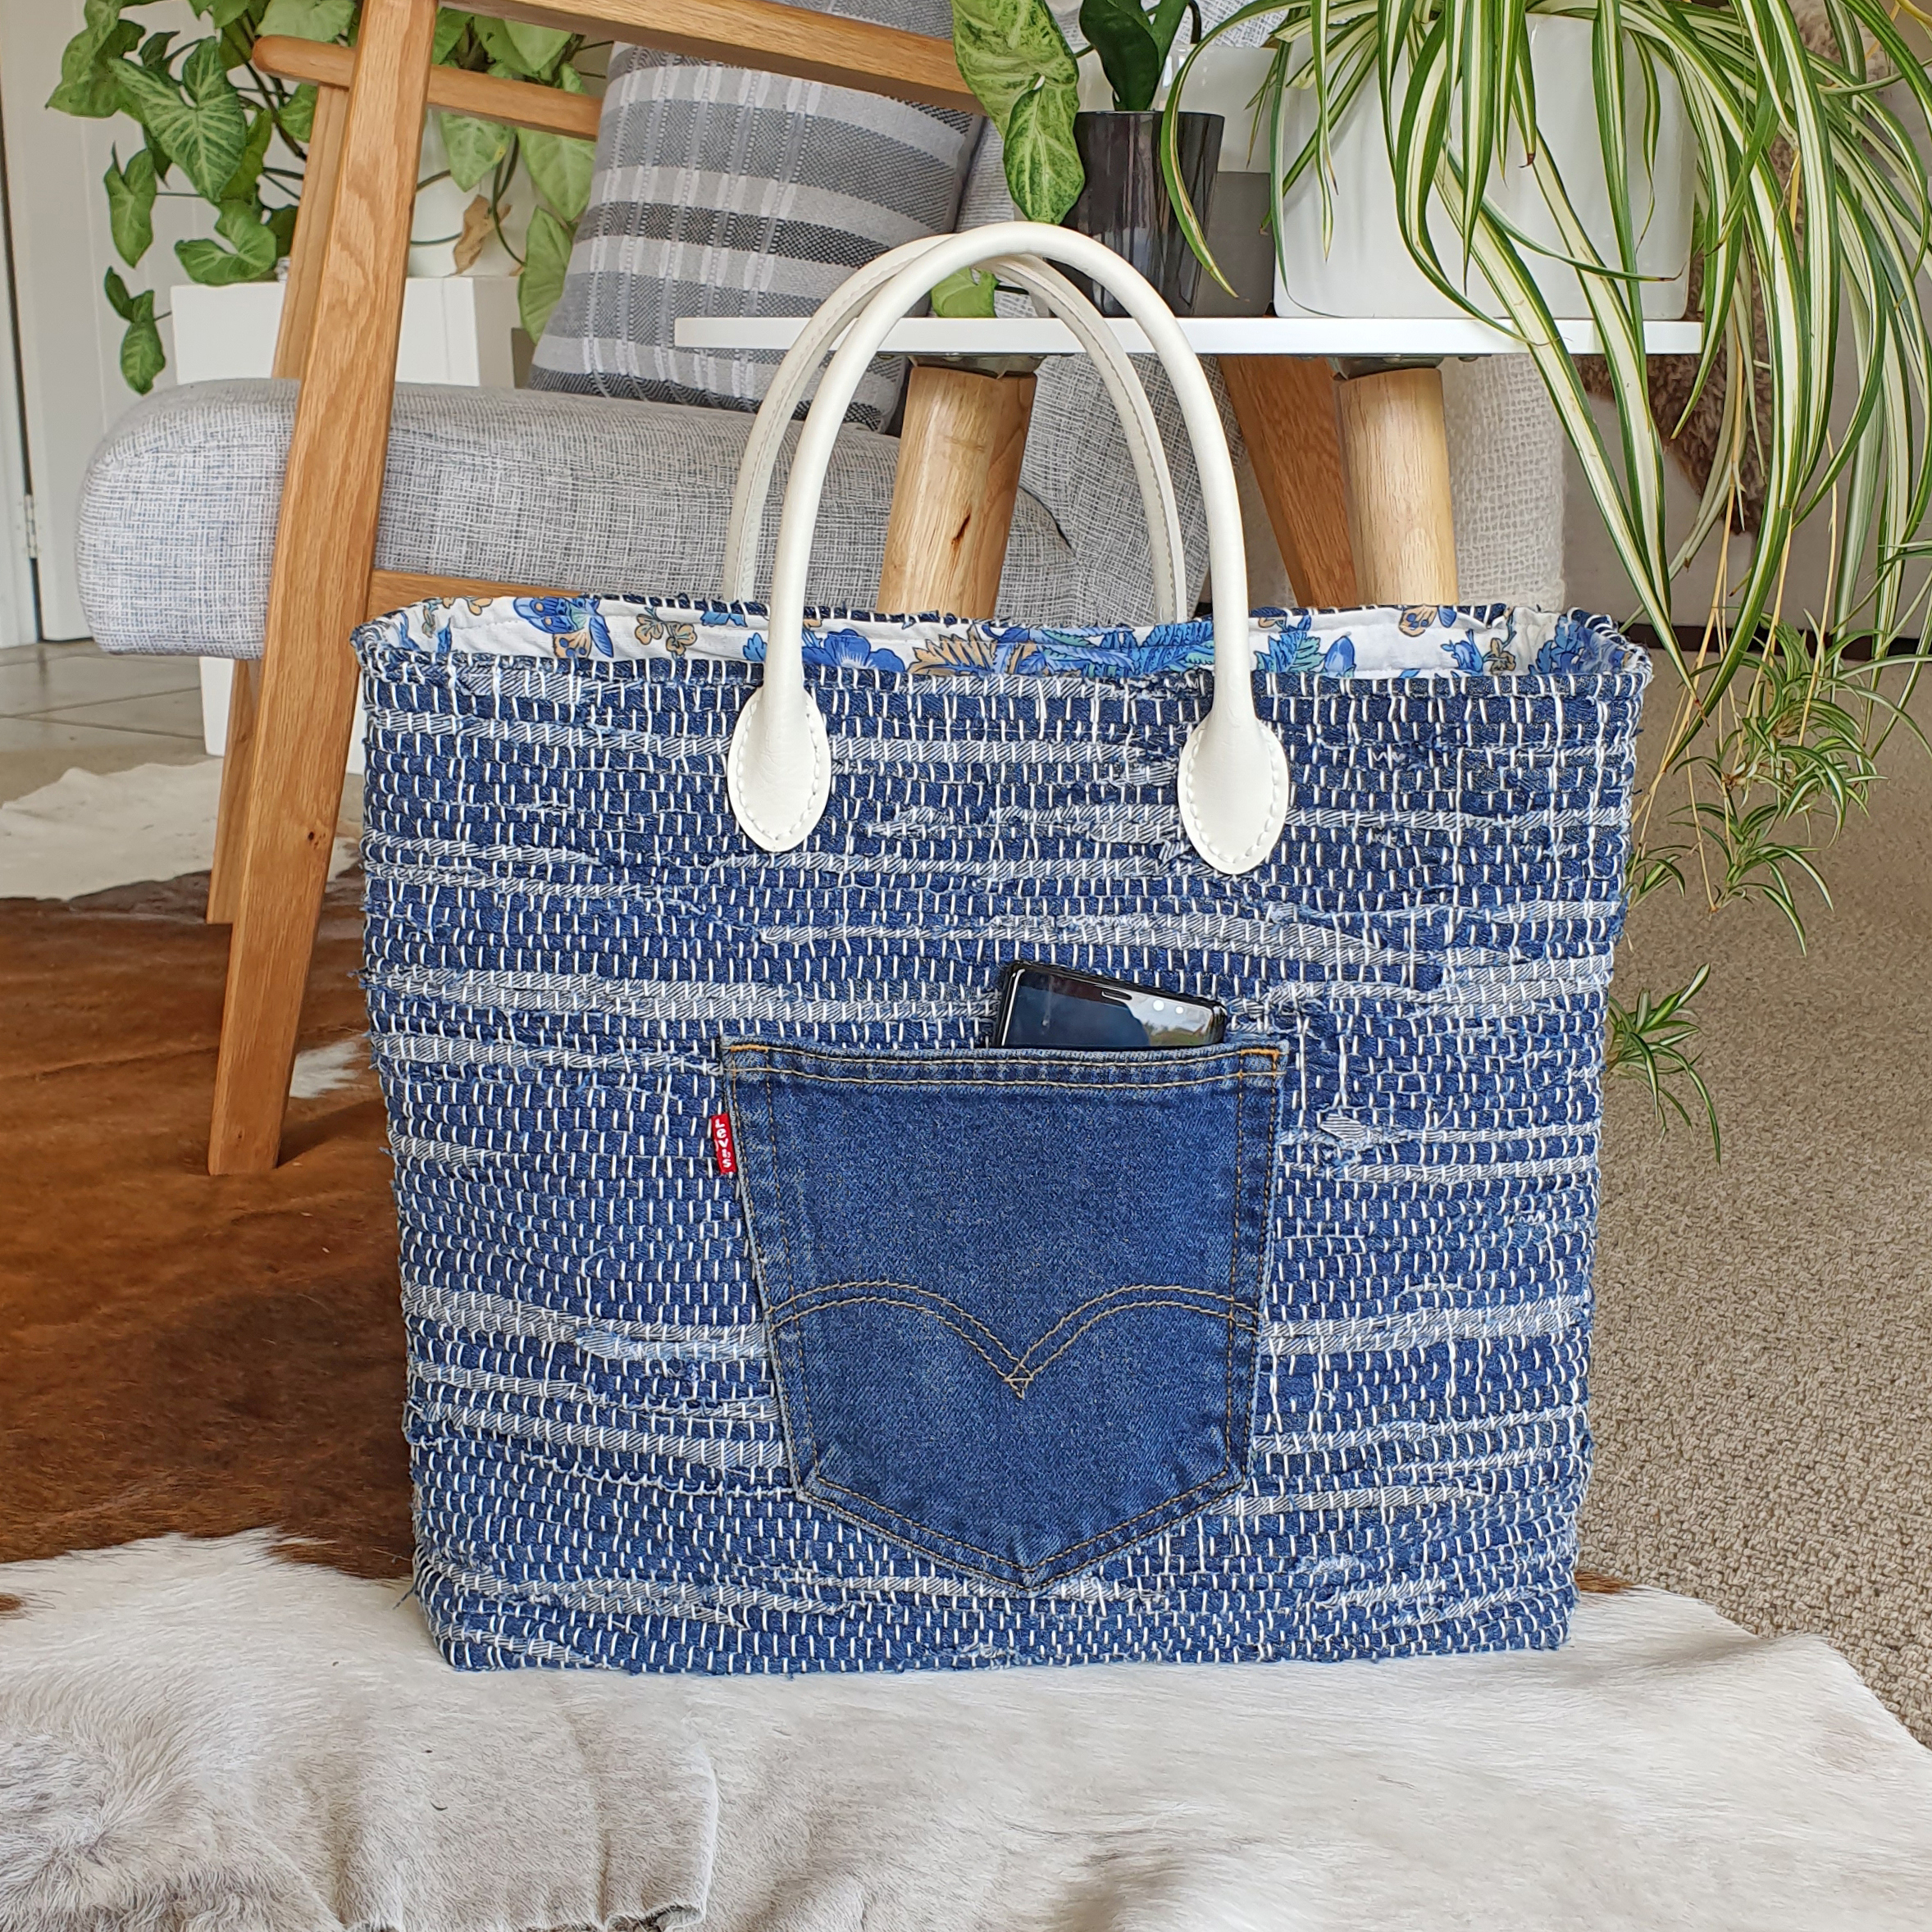 Denim Bag of Recycled Jeans, Blue